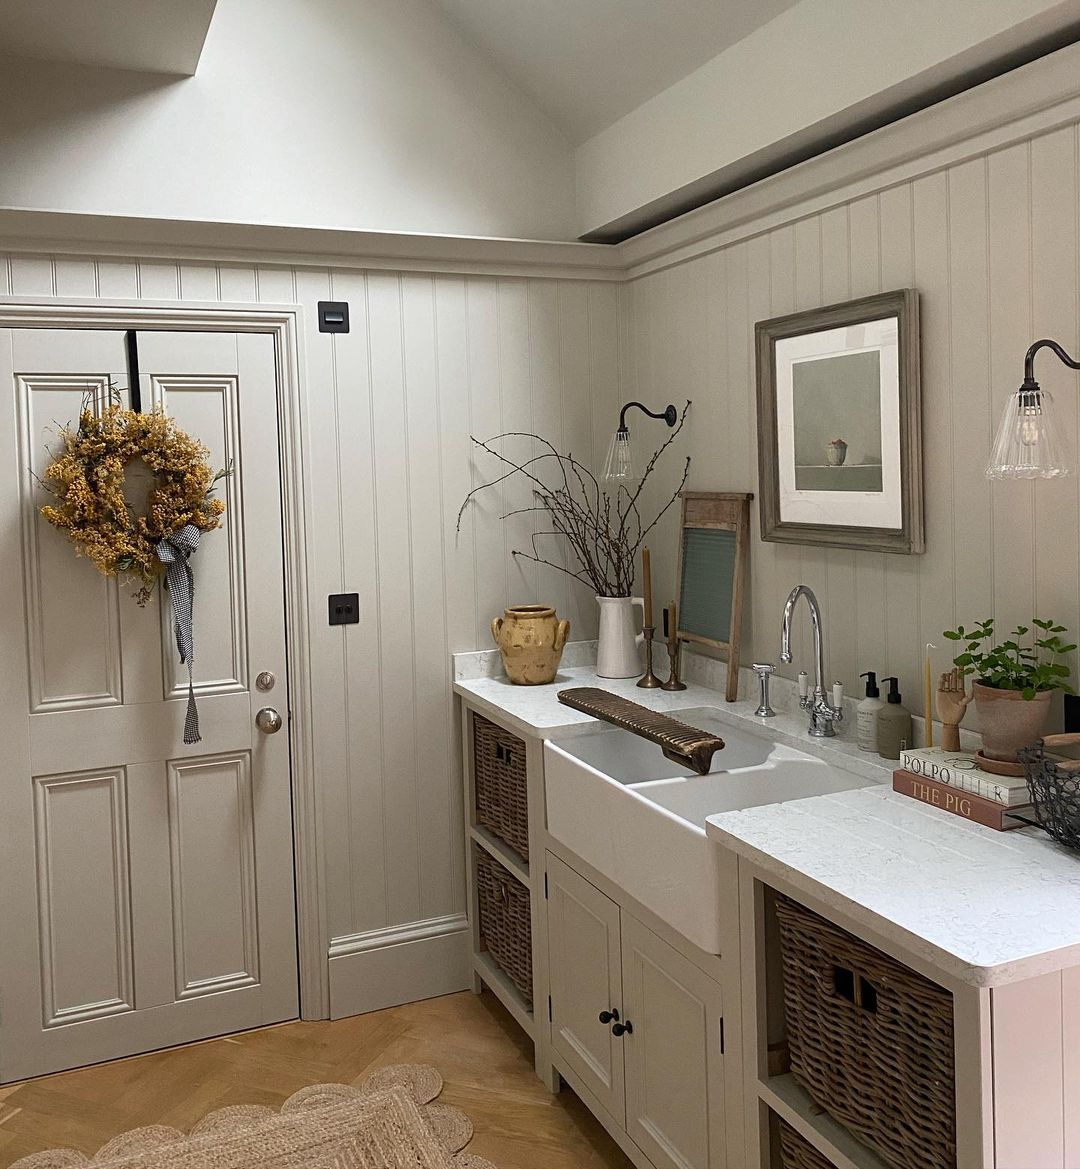 Light and bright color scheme for a long narrow laundry room is an effective way to create a sense of openness and make the room more comfortable to use.